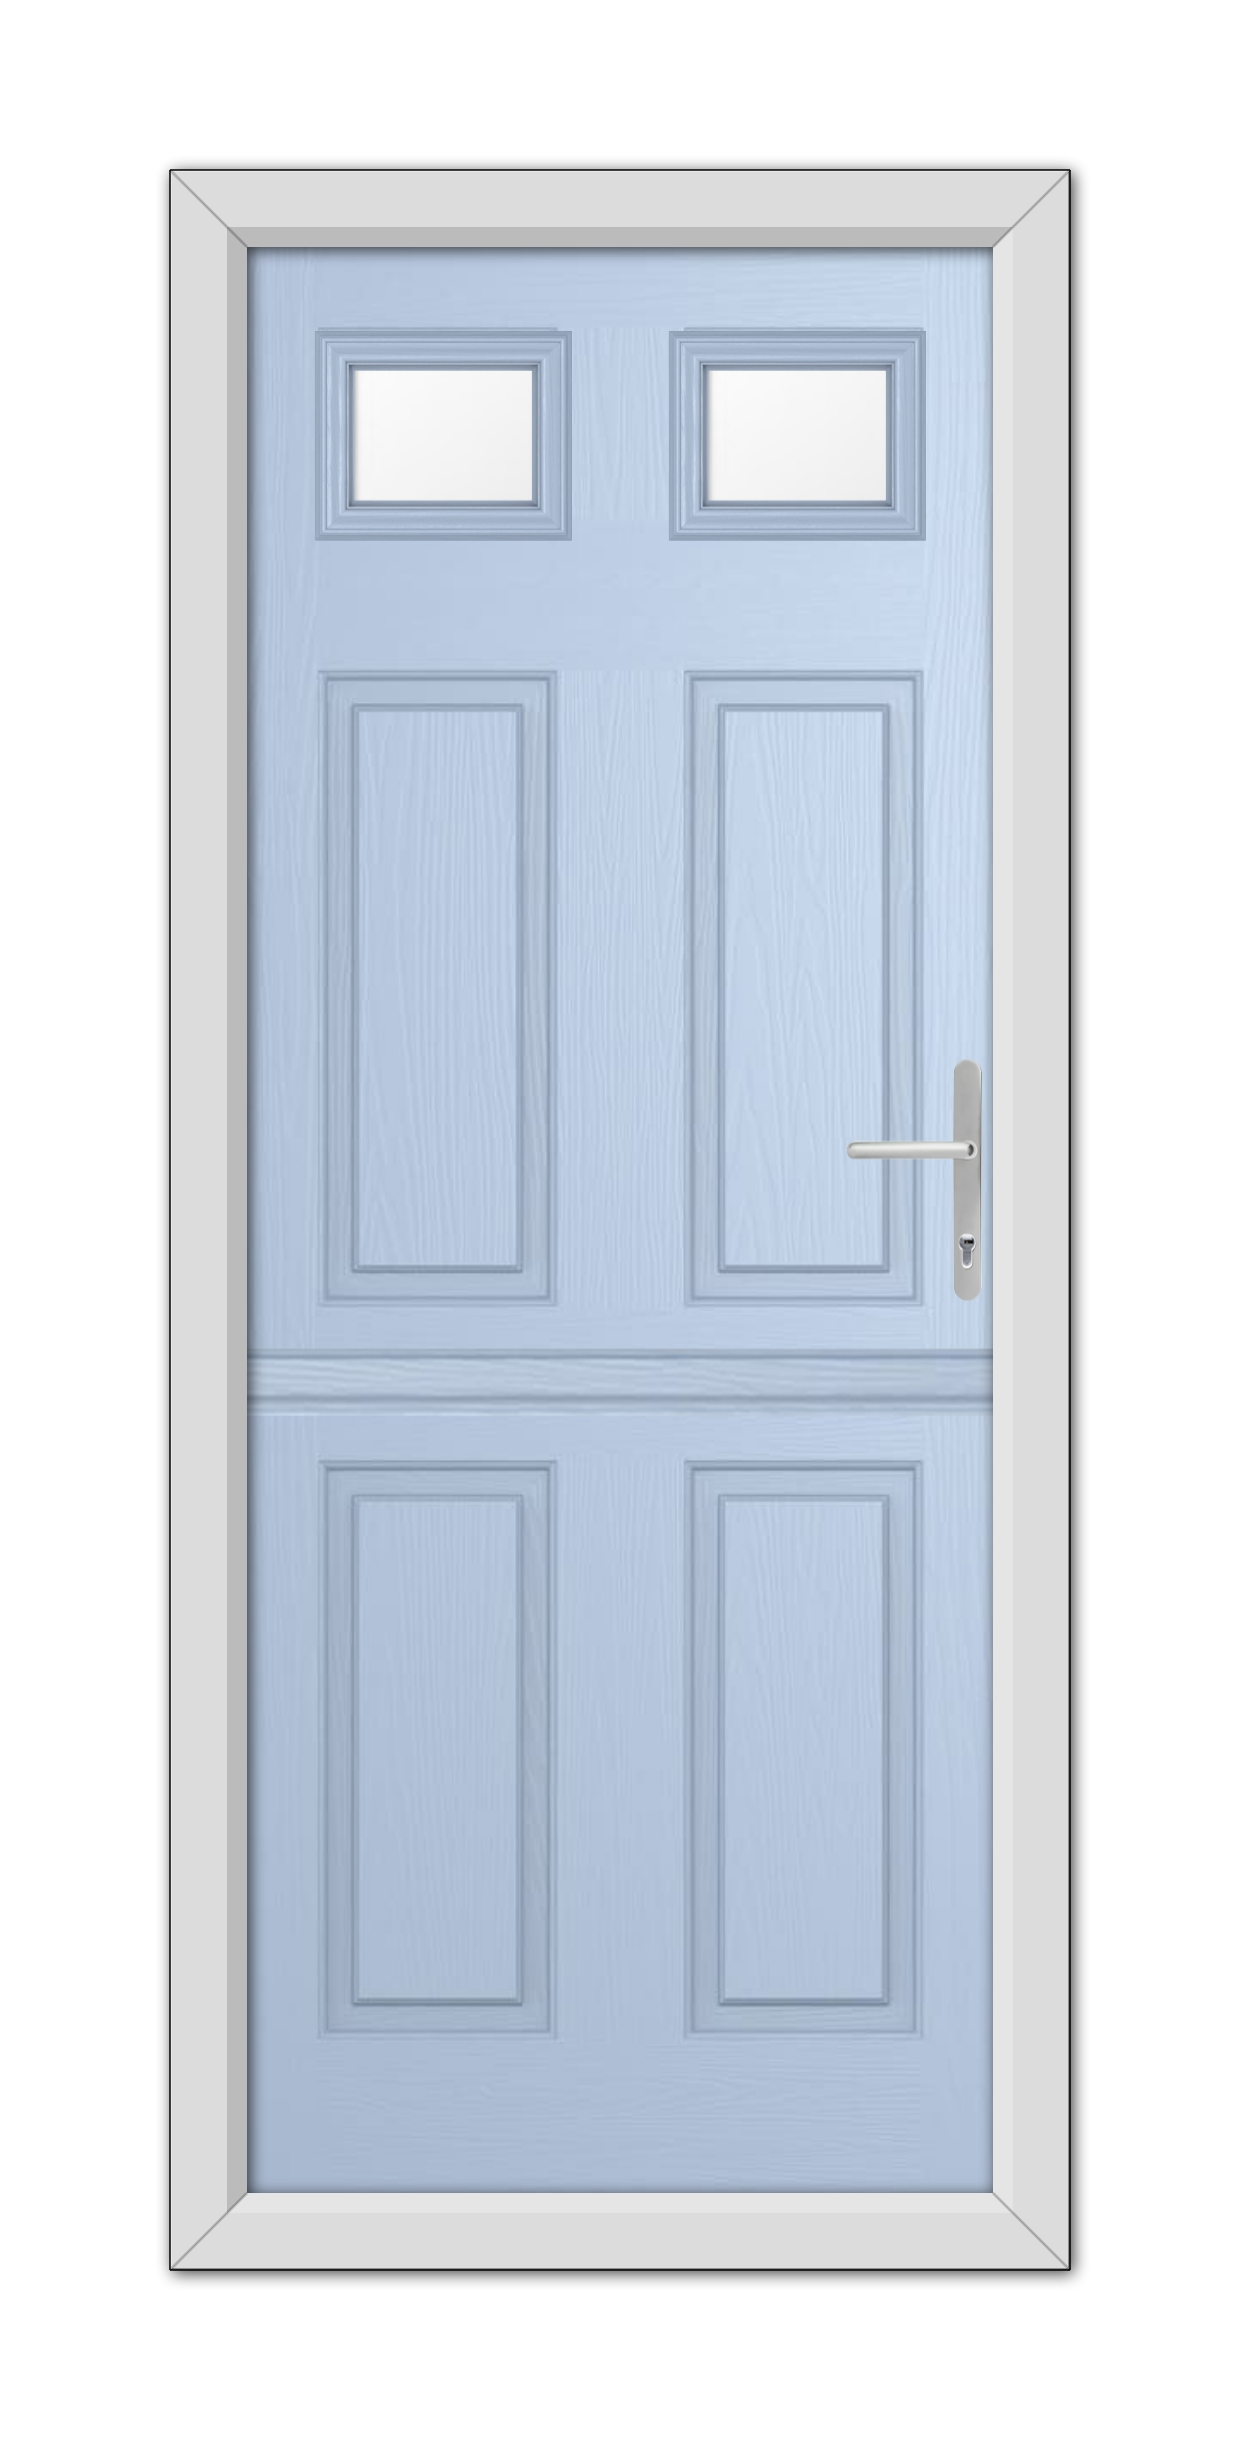 A Duck Egg Blue Middleton Glazed 2 Stable Composite Door with 48mm Timber Core and a metallic handle, set within a white frame, viewed from the front.